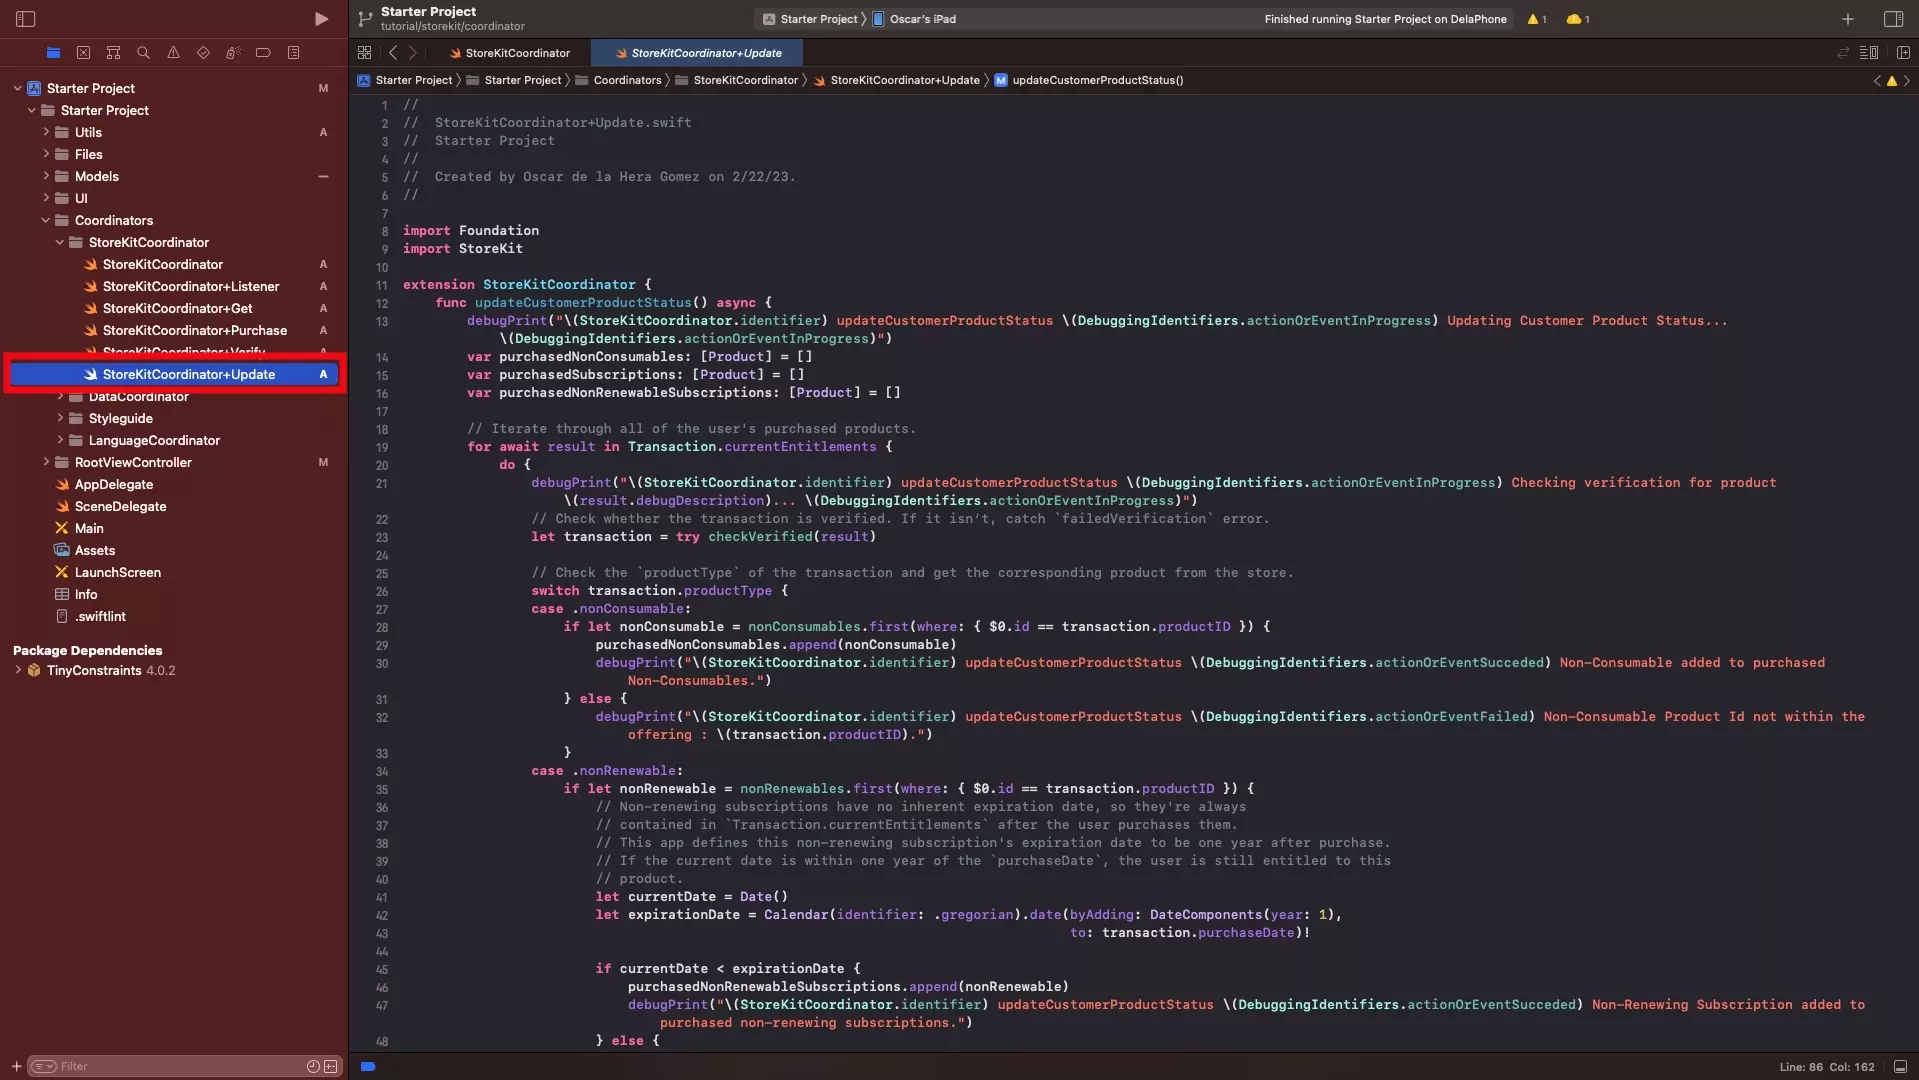 A screenshot of XCode showing the StoreKitCoordinator Update products extension. Code available below.